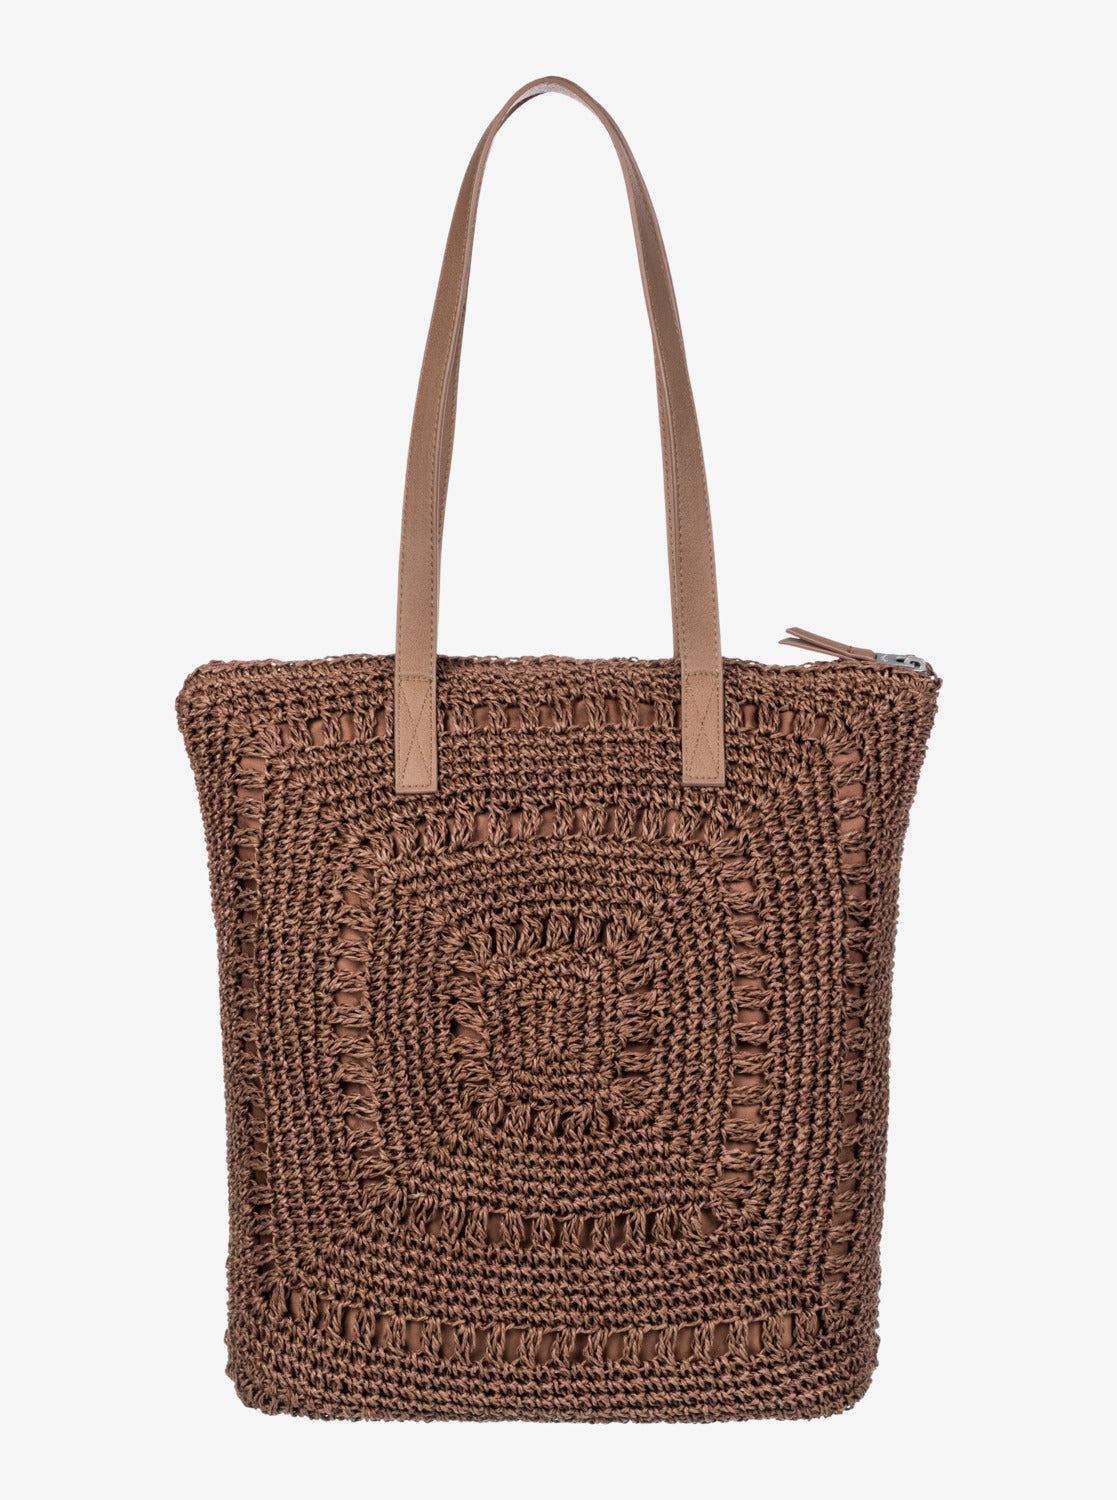 Roxy Coco Cool Tote Bag - Root Beer